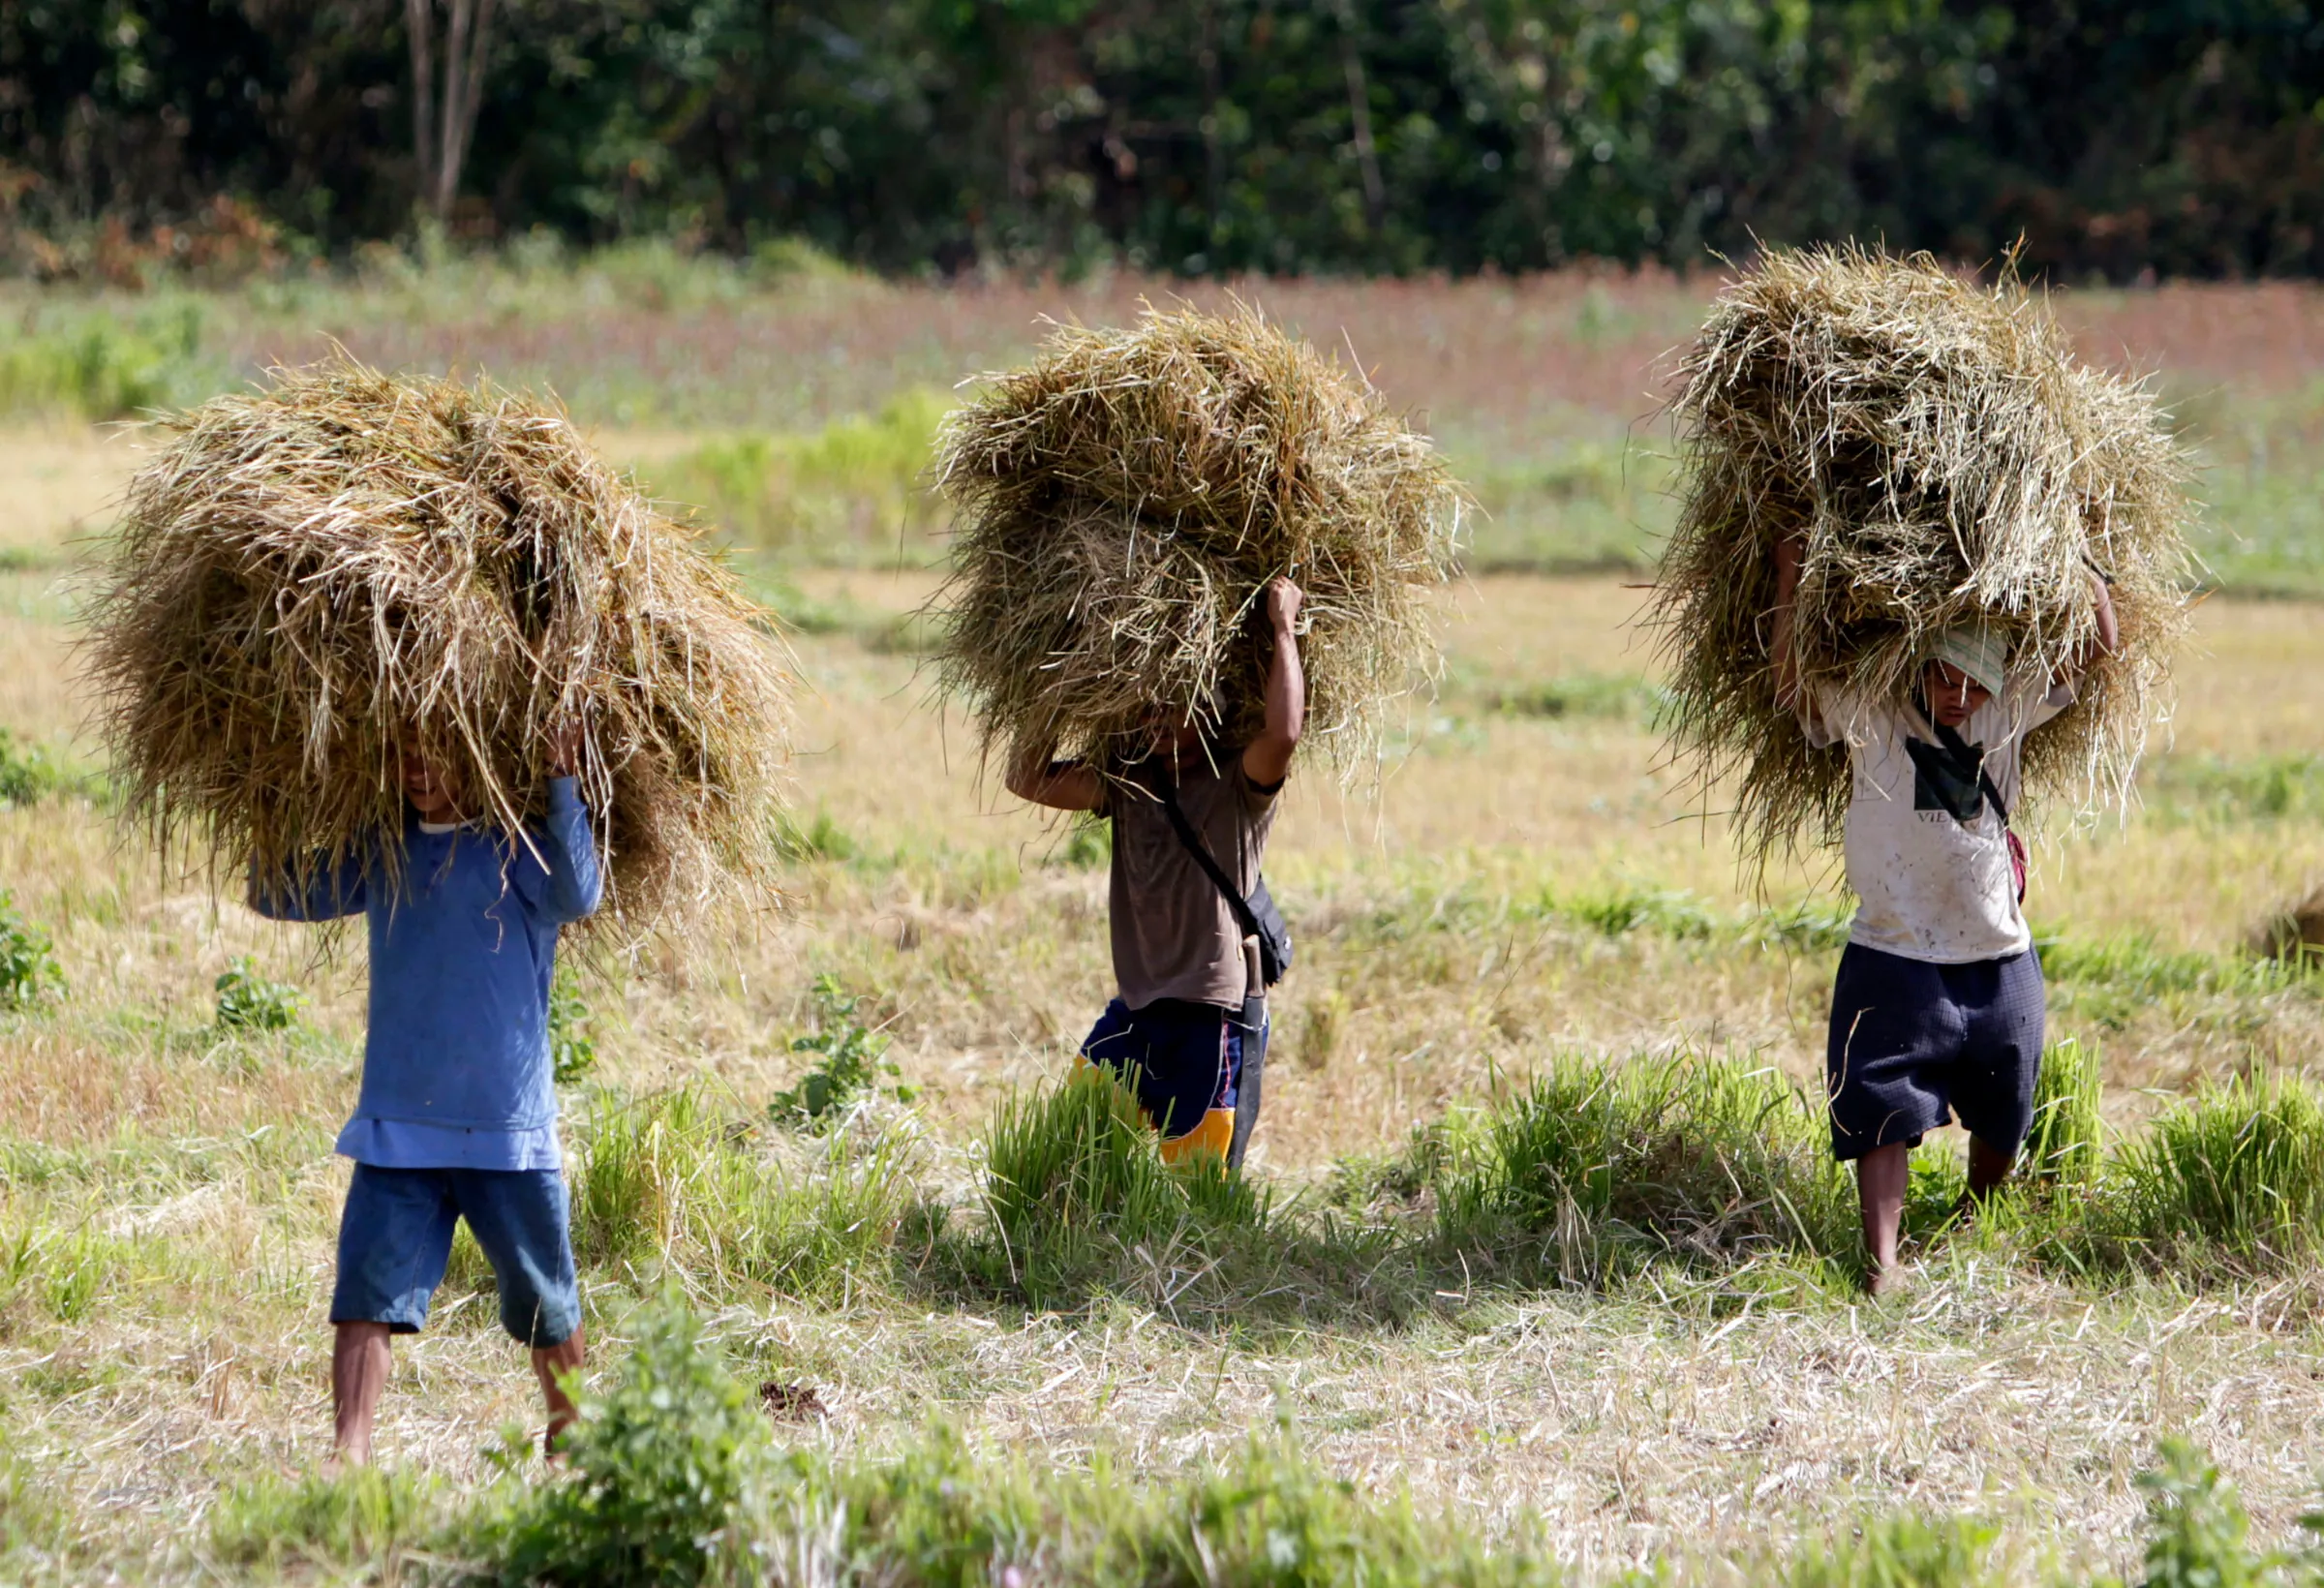 Farmers carry hay for animal feed on their heads at a farm in Magsaysay, Occidental Mindoro in central Philippines